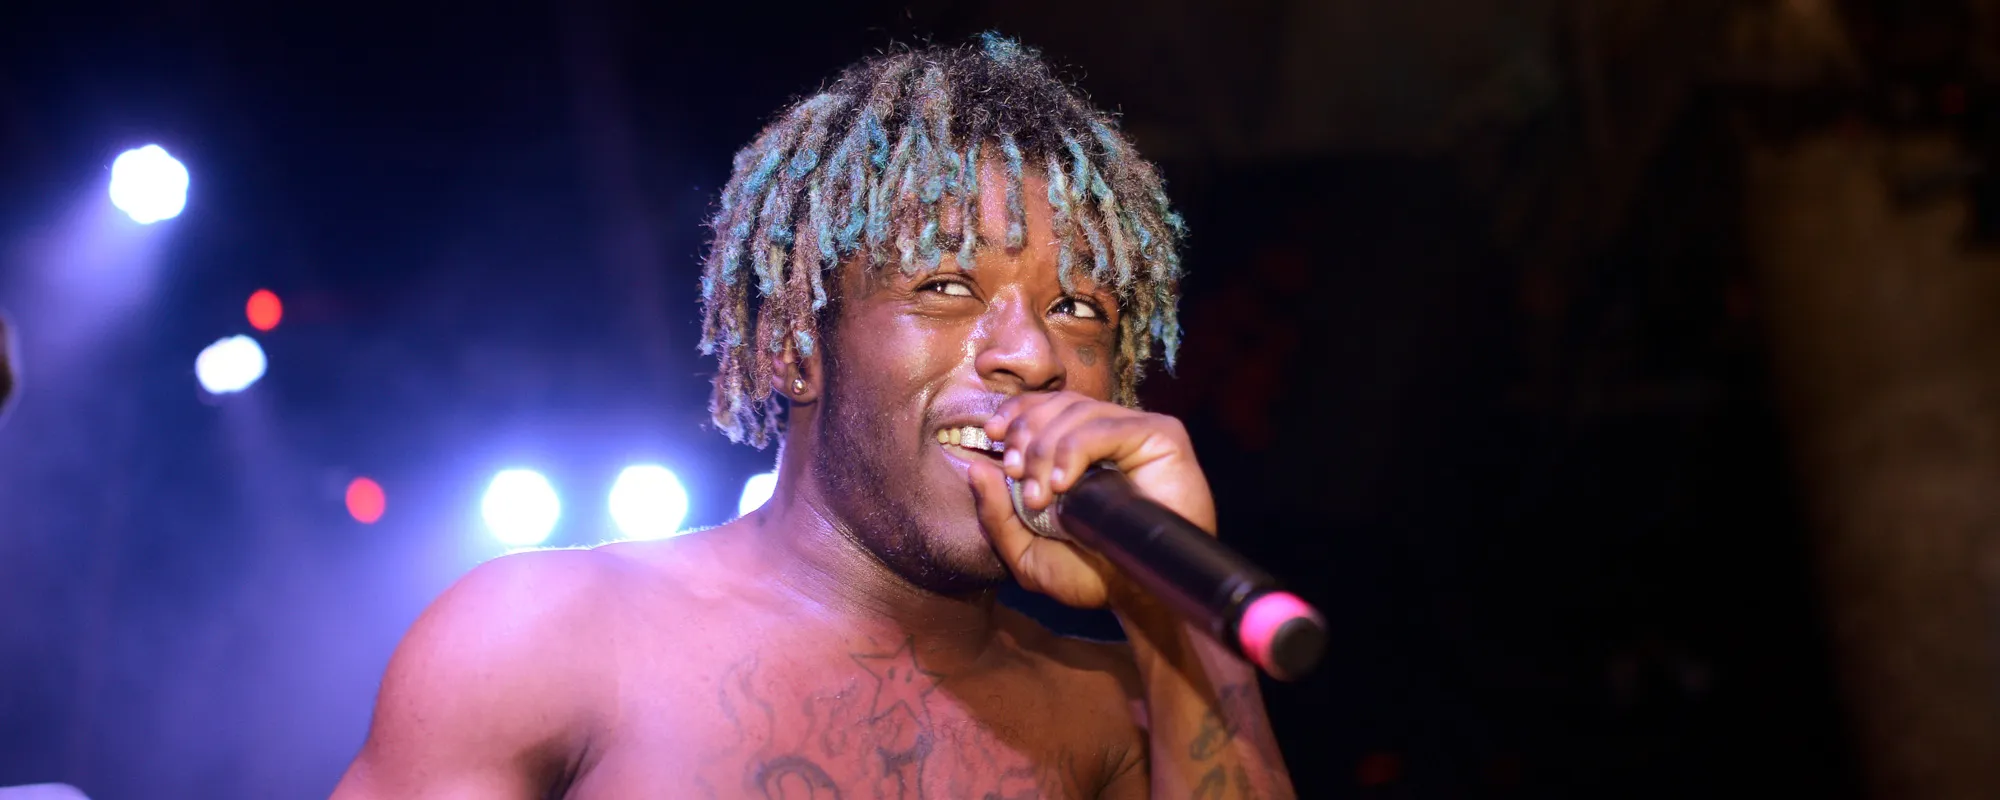 Lil Uzi Vert Reveals Release Date for ‘The Pink Tape’